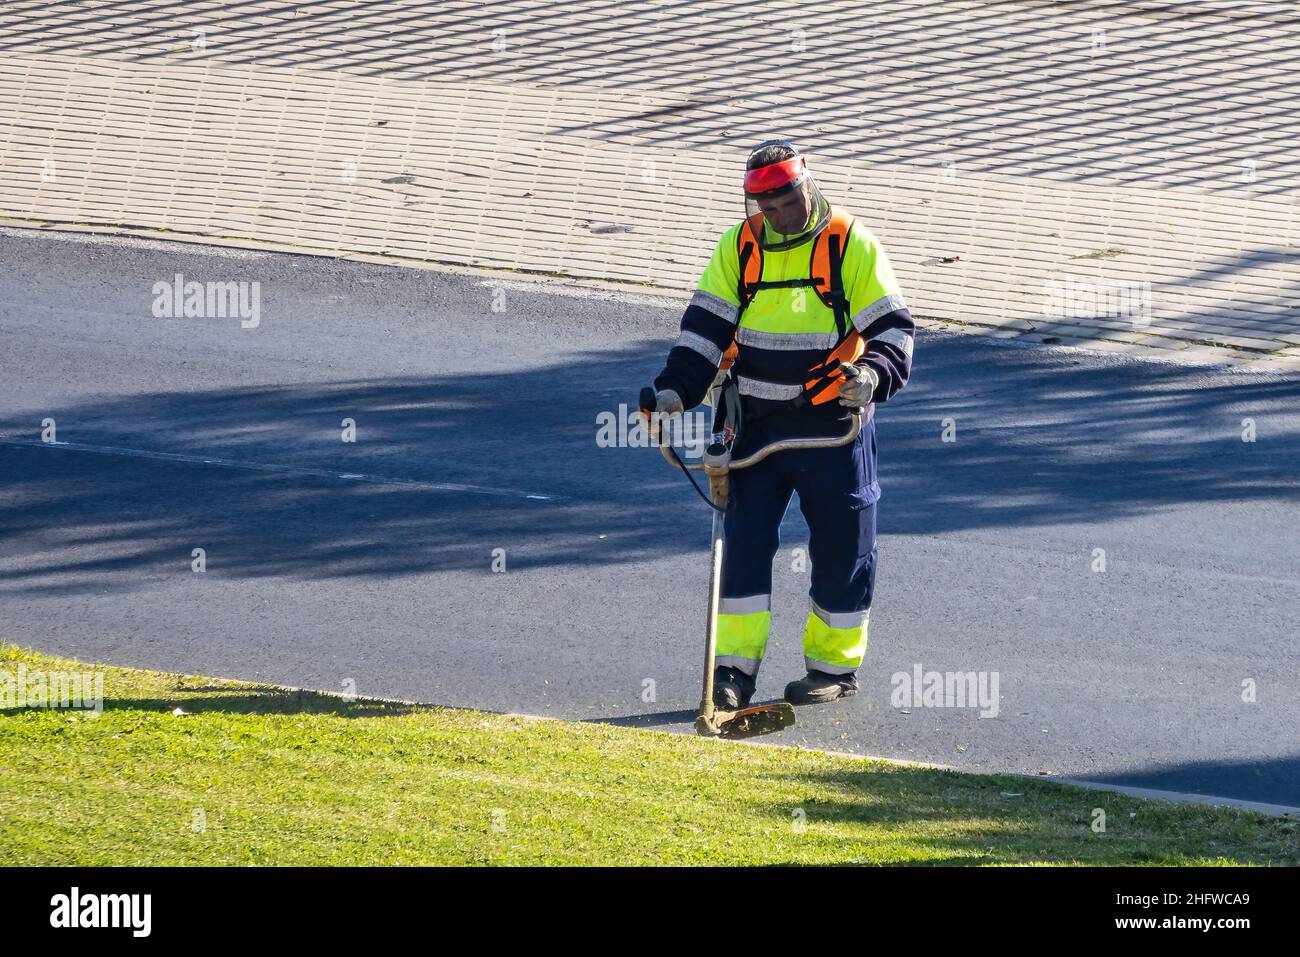 workers mowing lawn with grass trimmer outdoors on sunny day Stock Photo